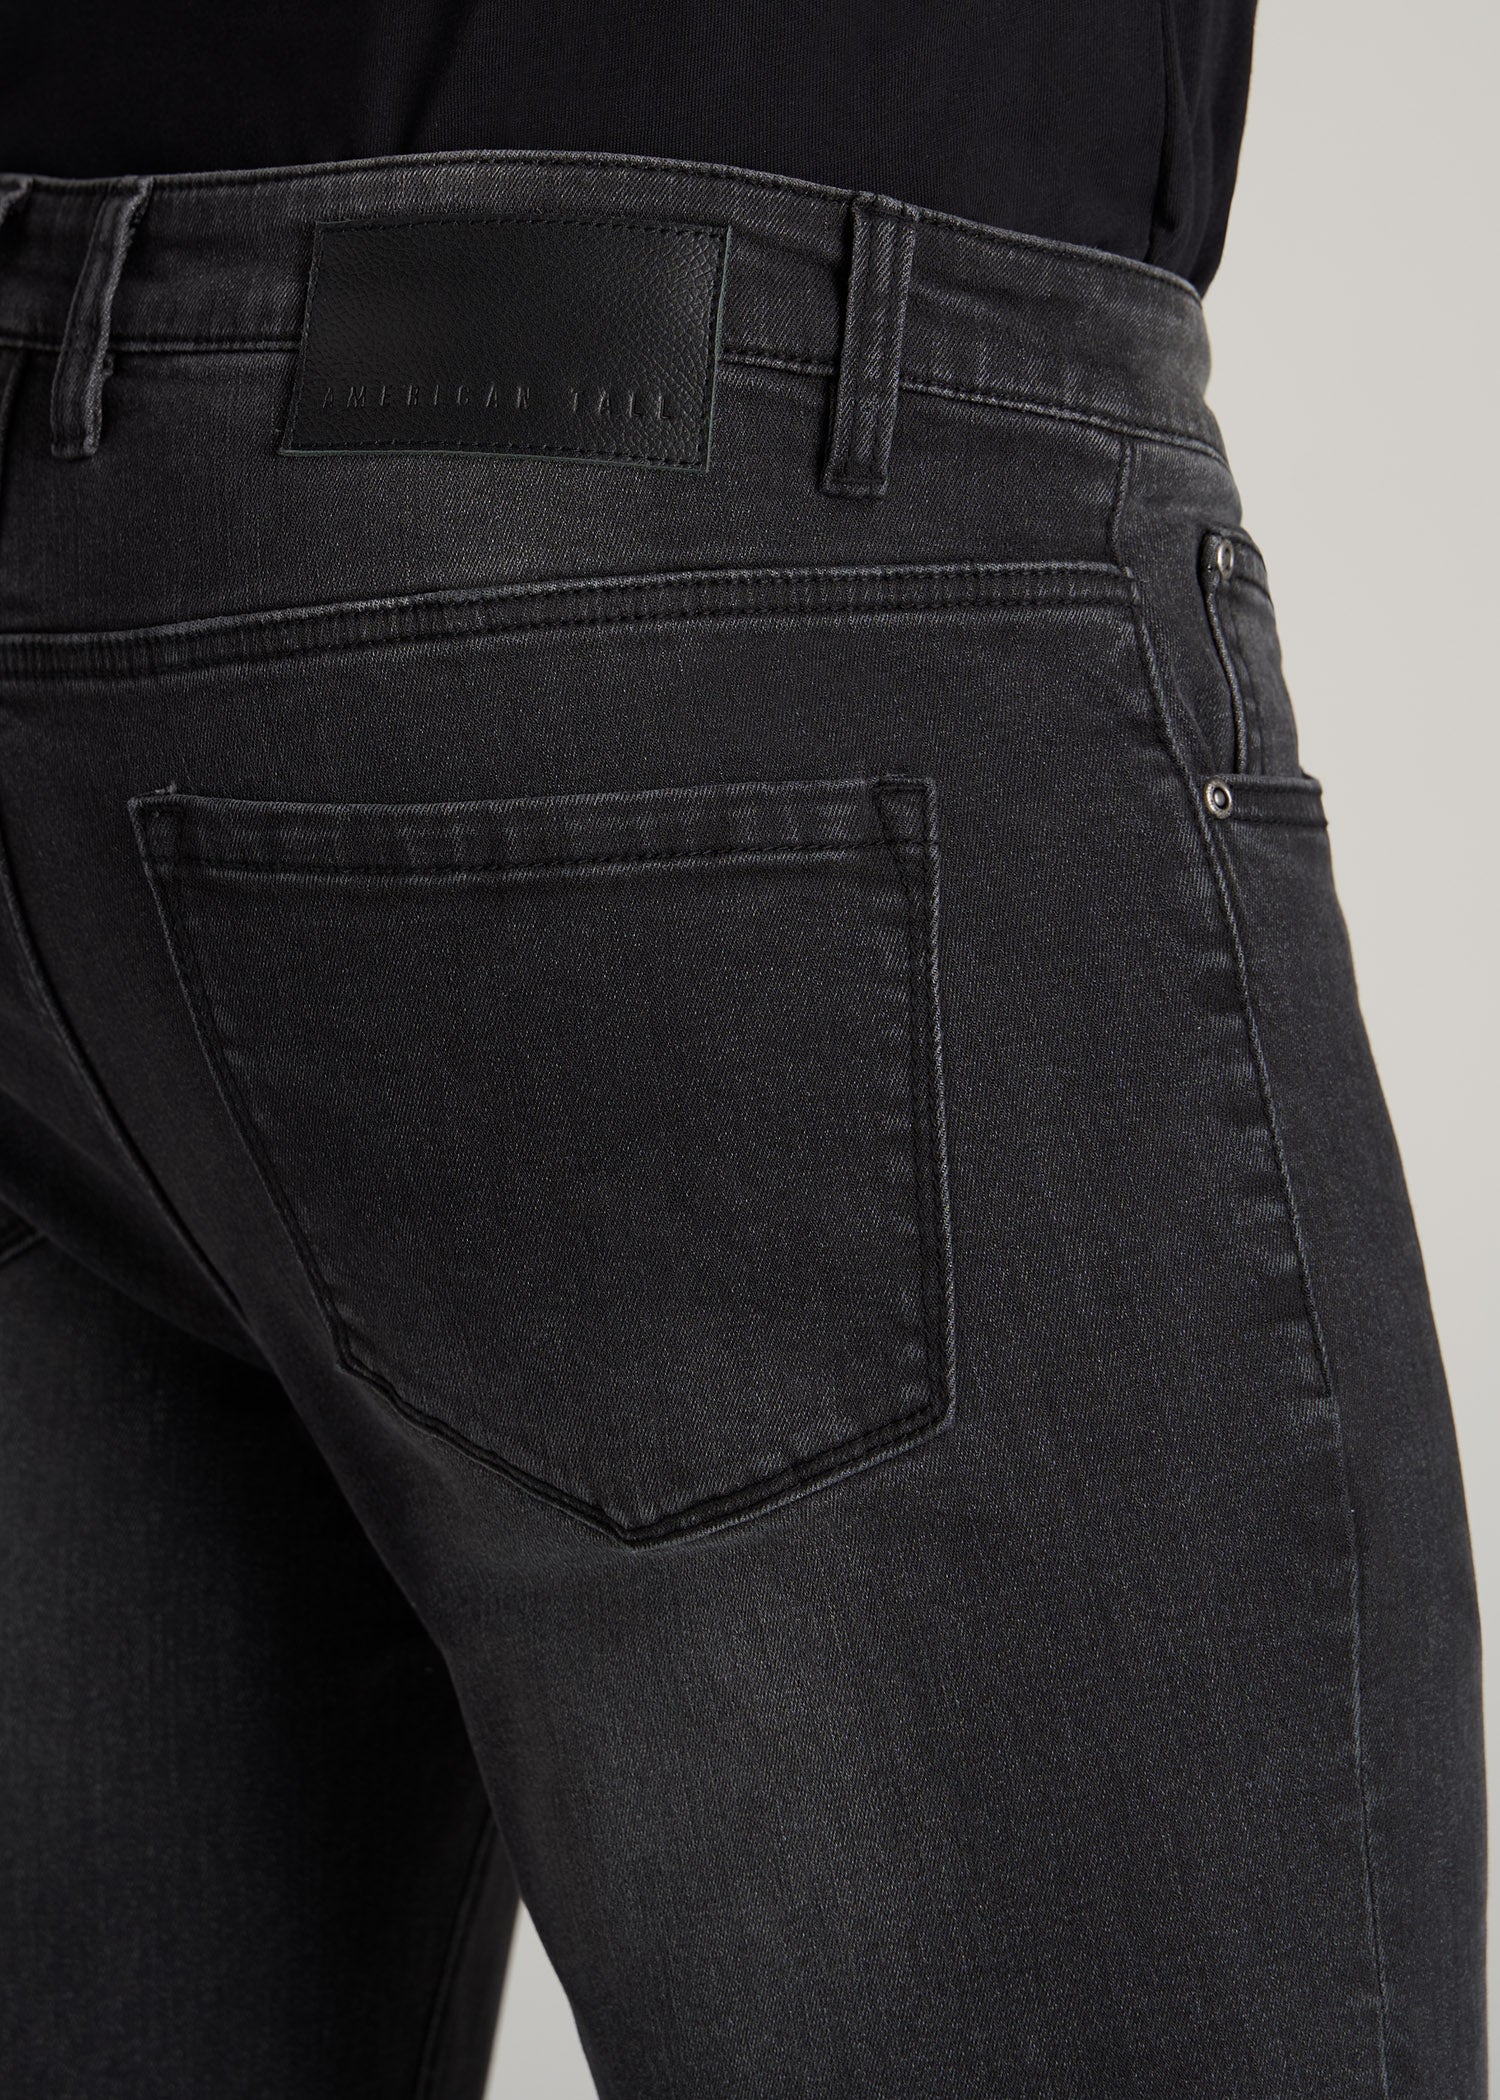 Travis Skinny Jeans for Tall Men | American Tall